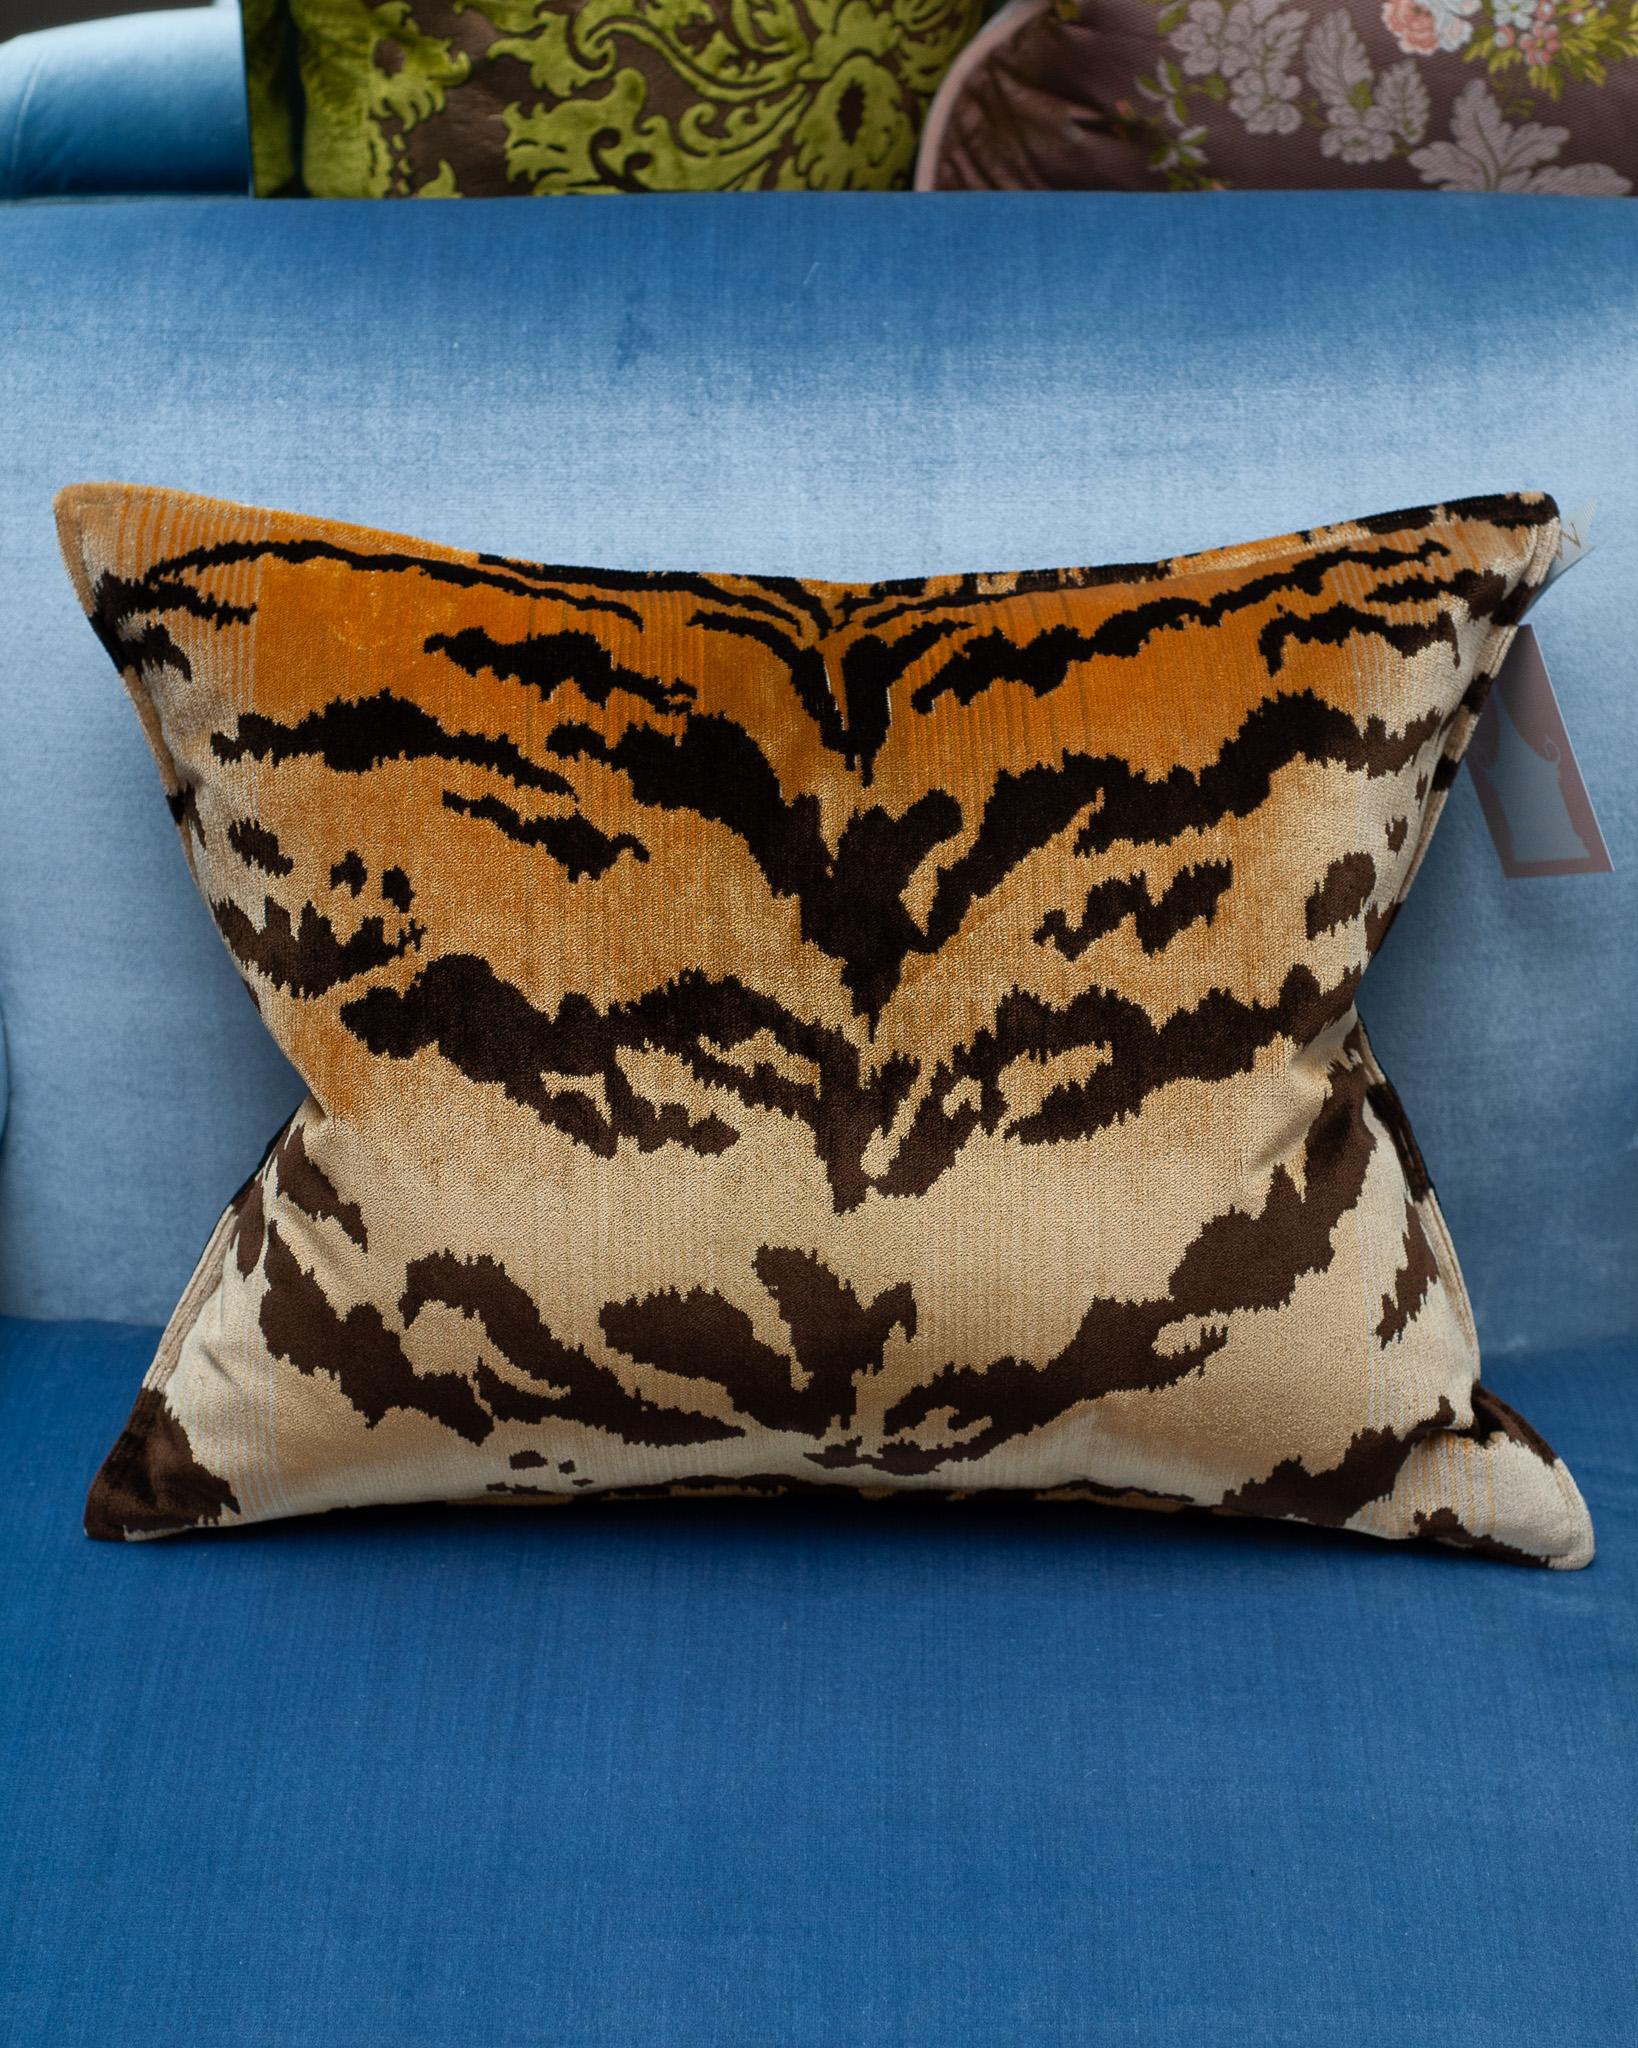 A stunning Bevilacqua Tessuti silk velvet pillow in tan and black with tiger pattern. Made in Bevilacqua's workshop for Maison Nurita, this luxurious pillow is backed in Bevilacqua black silk moiré. Filled with the highest quality down and feather